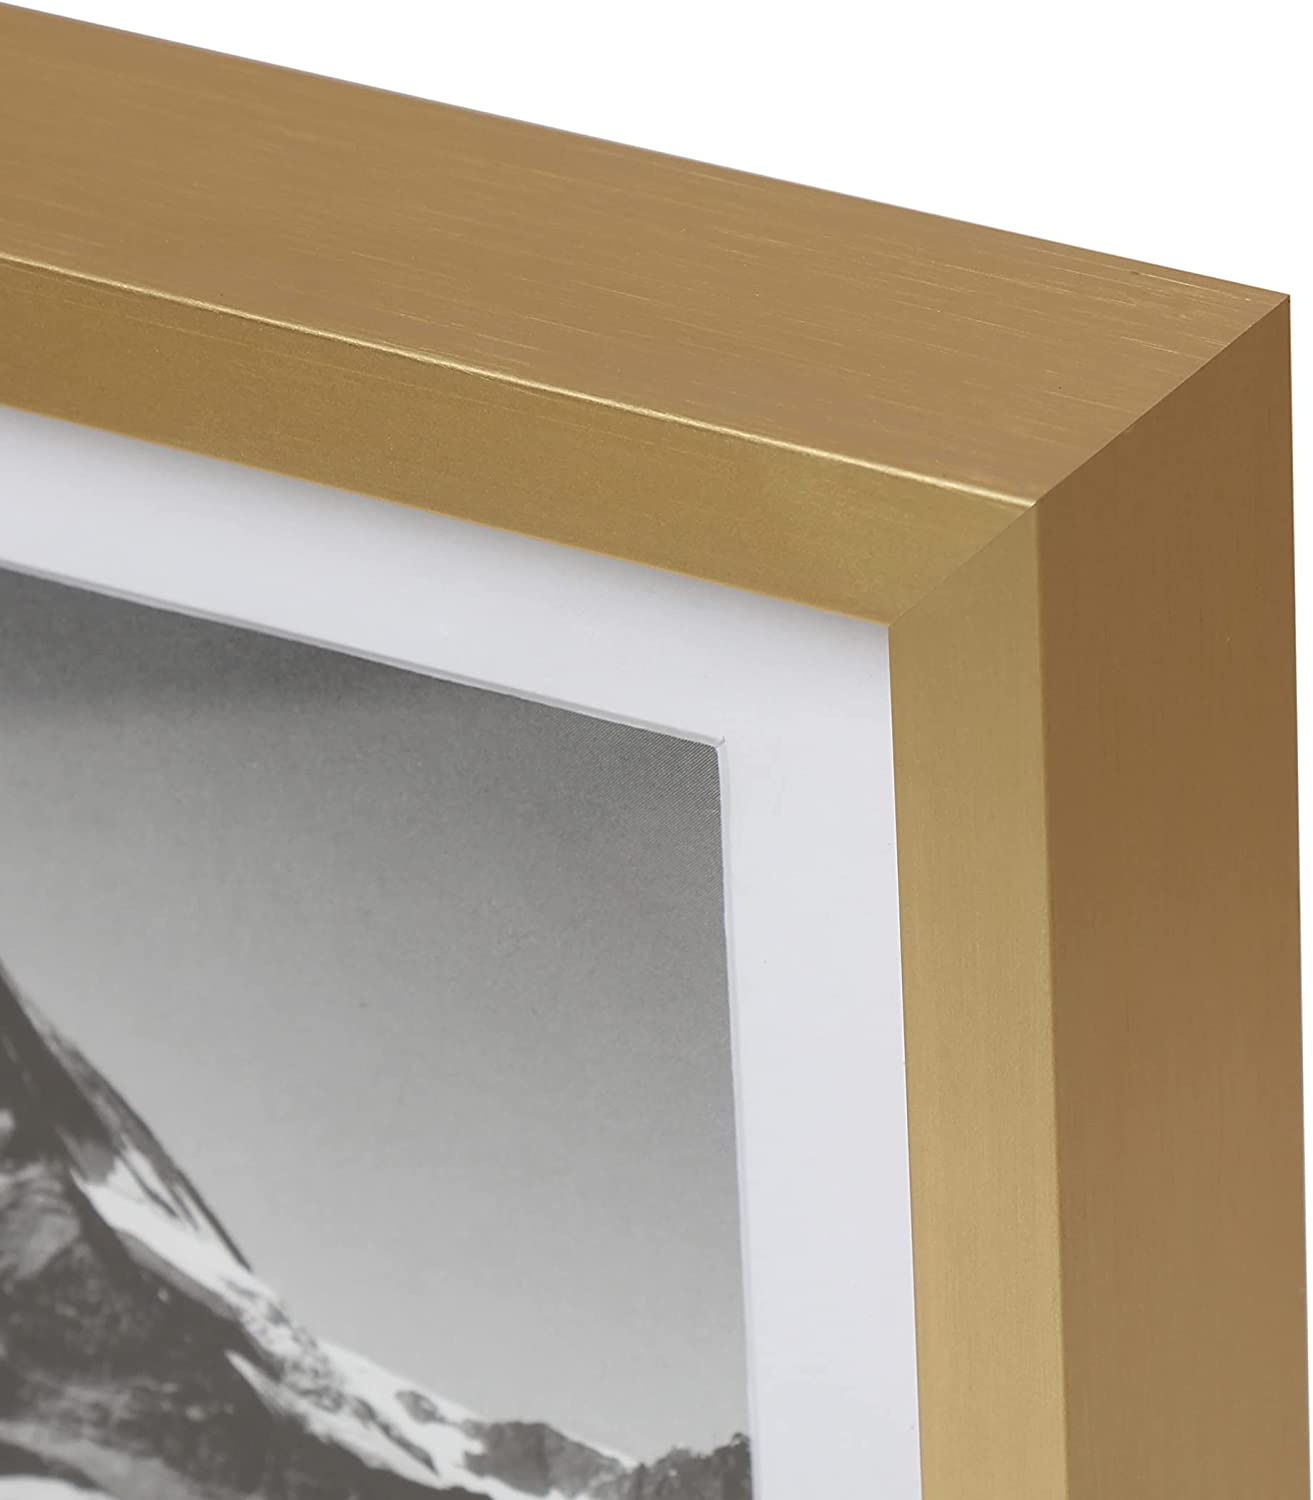 18x24 Mat for 12x18 Photo - Metallic Gold Matboard for Frames Measuring 18 x 24 Inches - to Display Art Measuring 12 x 18 Inches